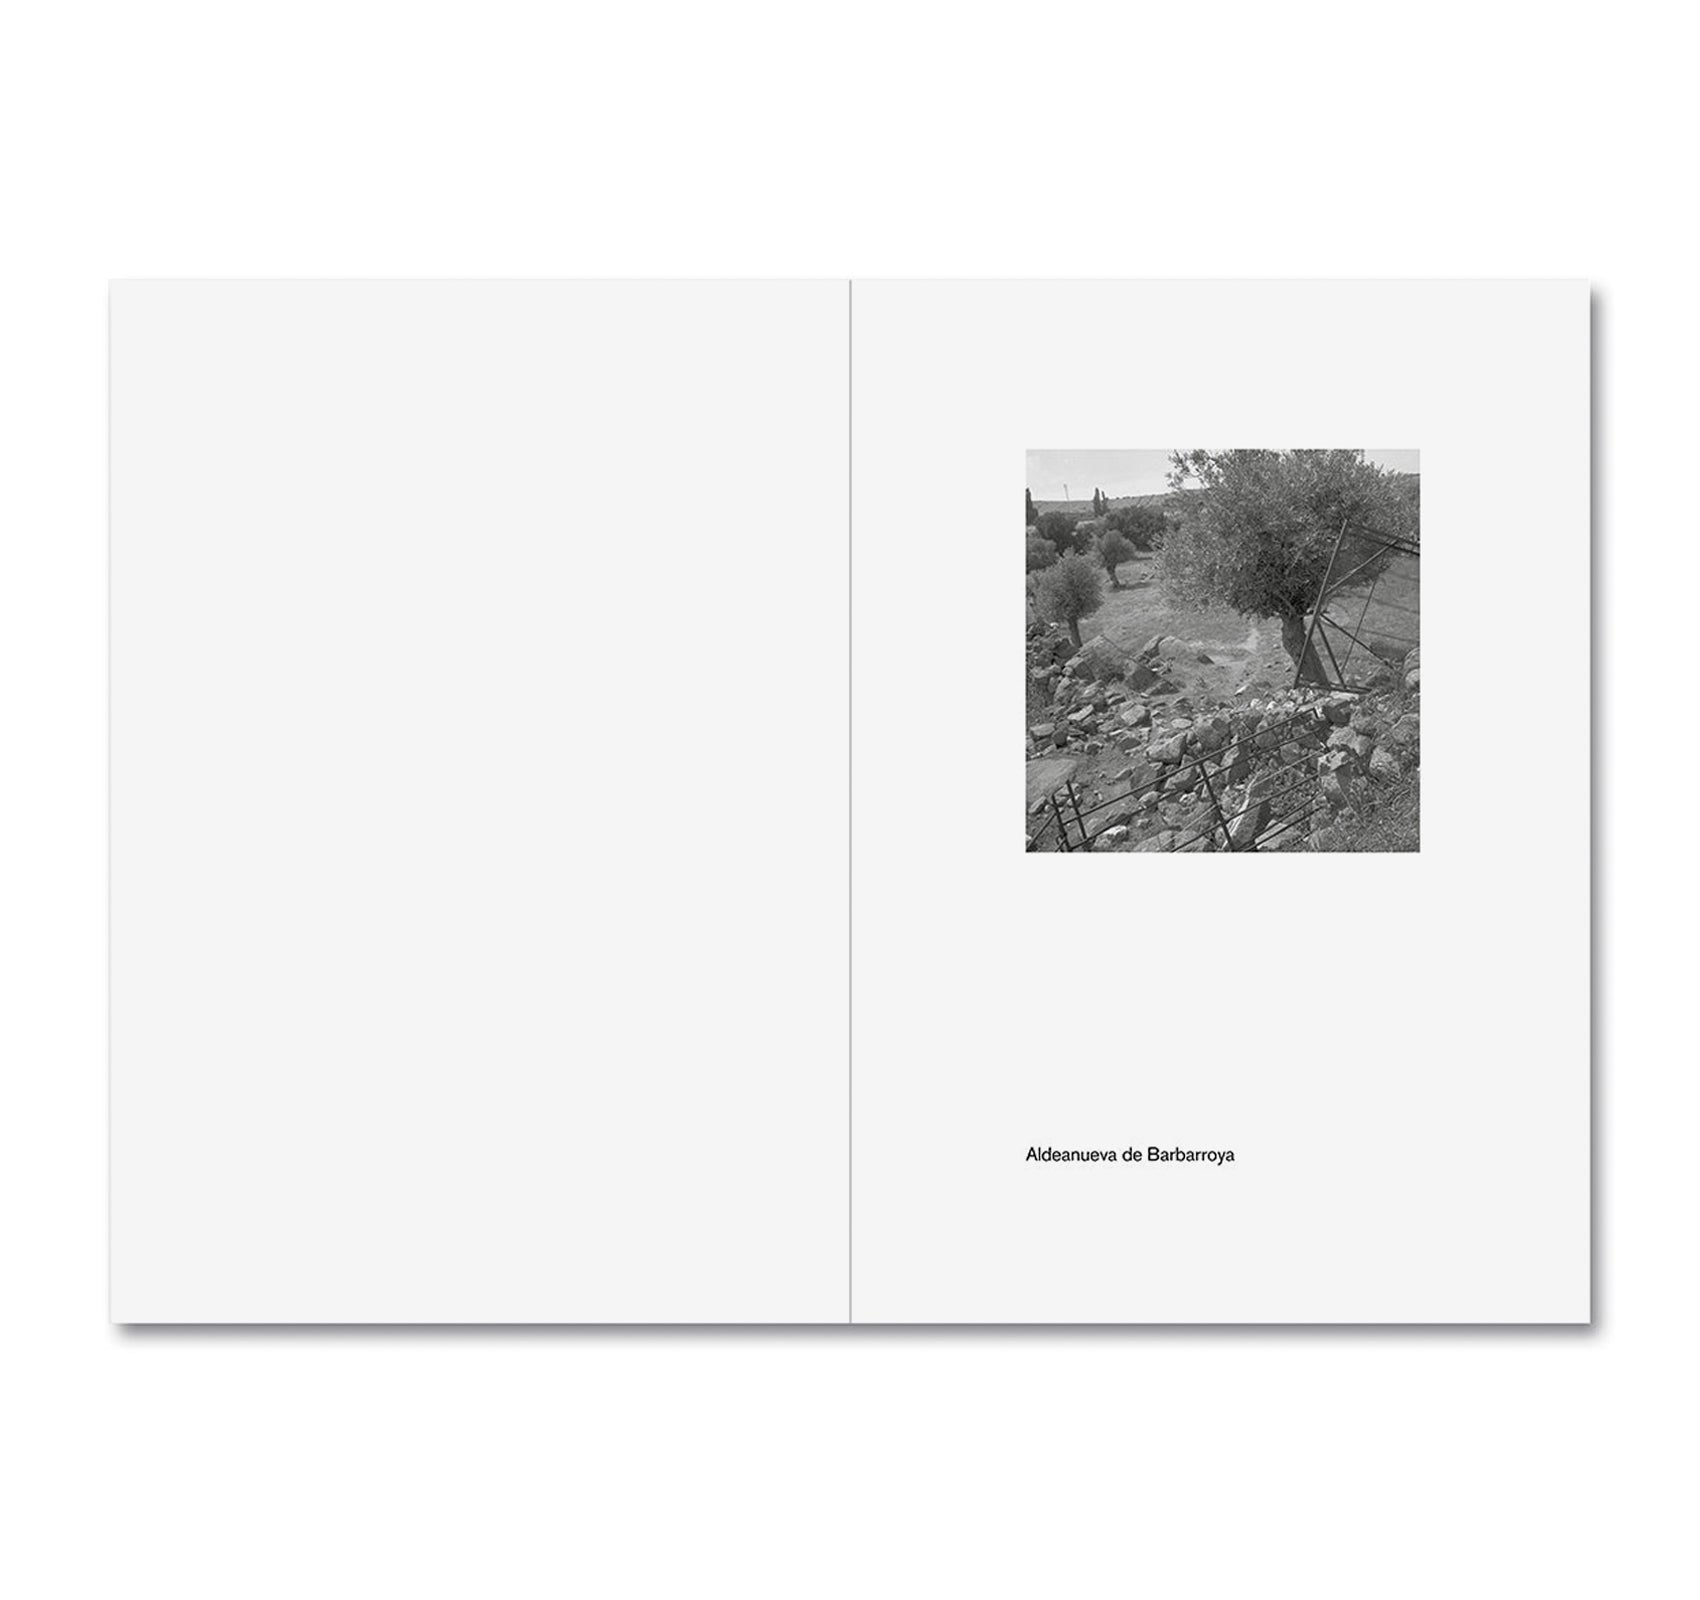 SPANISH SUMMER by Gerry Johansson [SPECIAL EDITION]